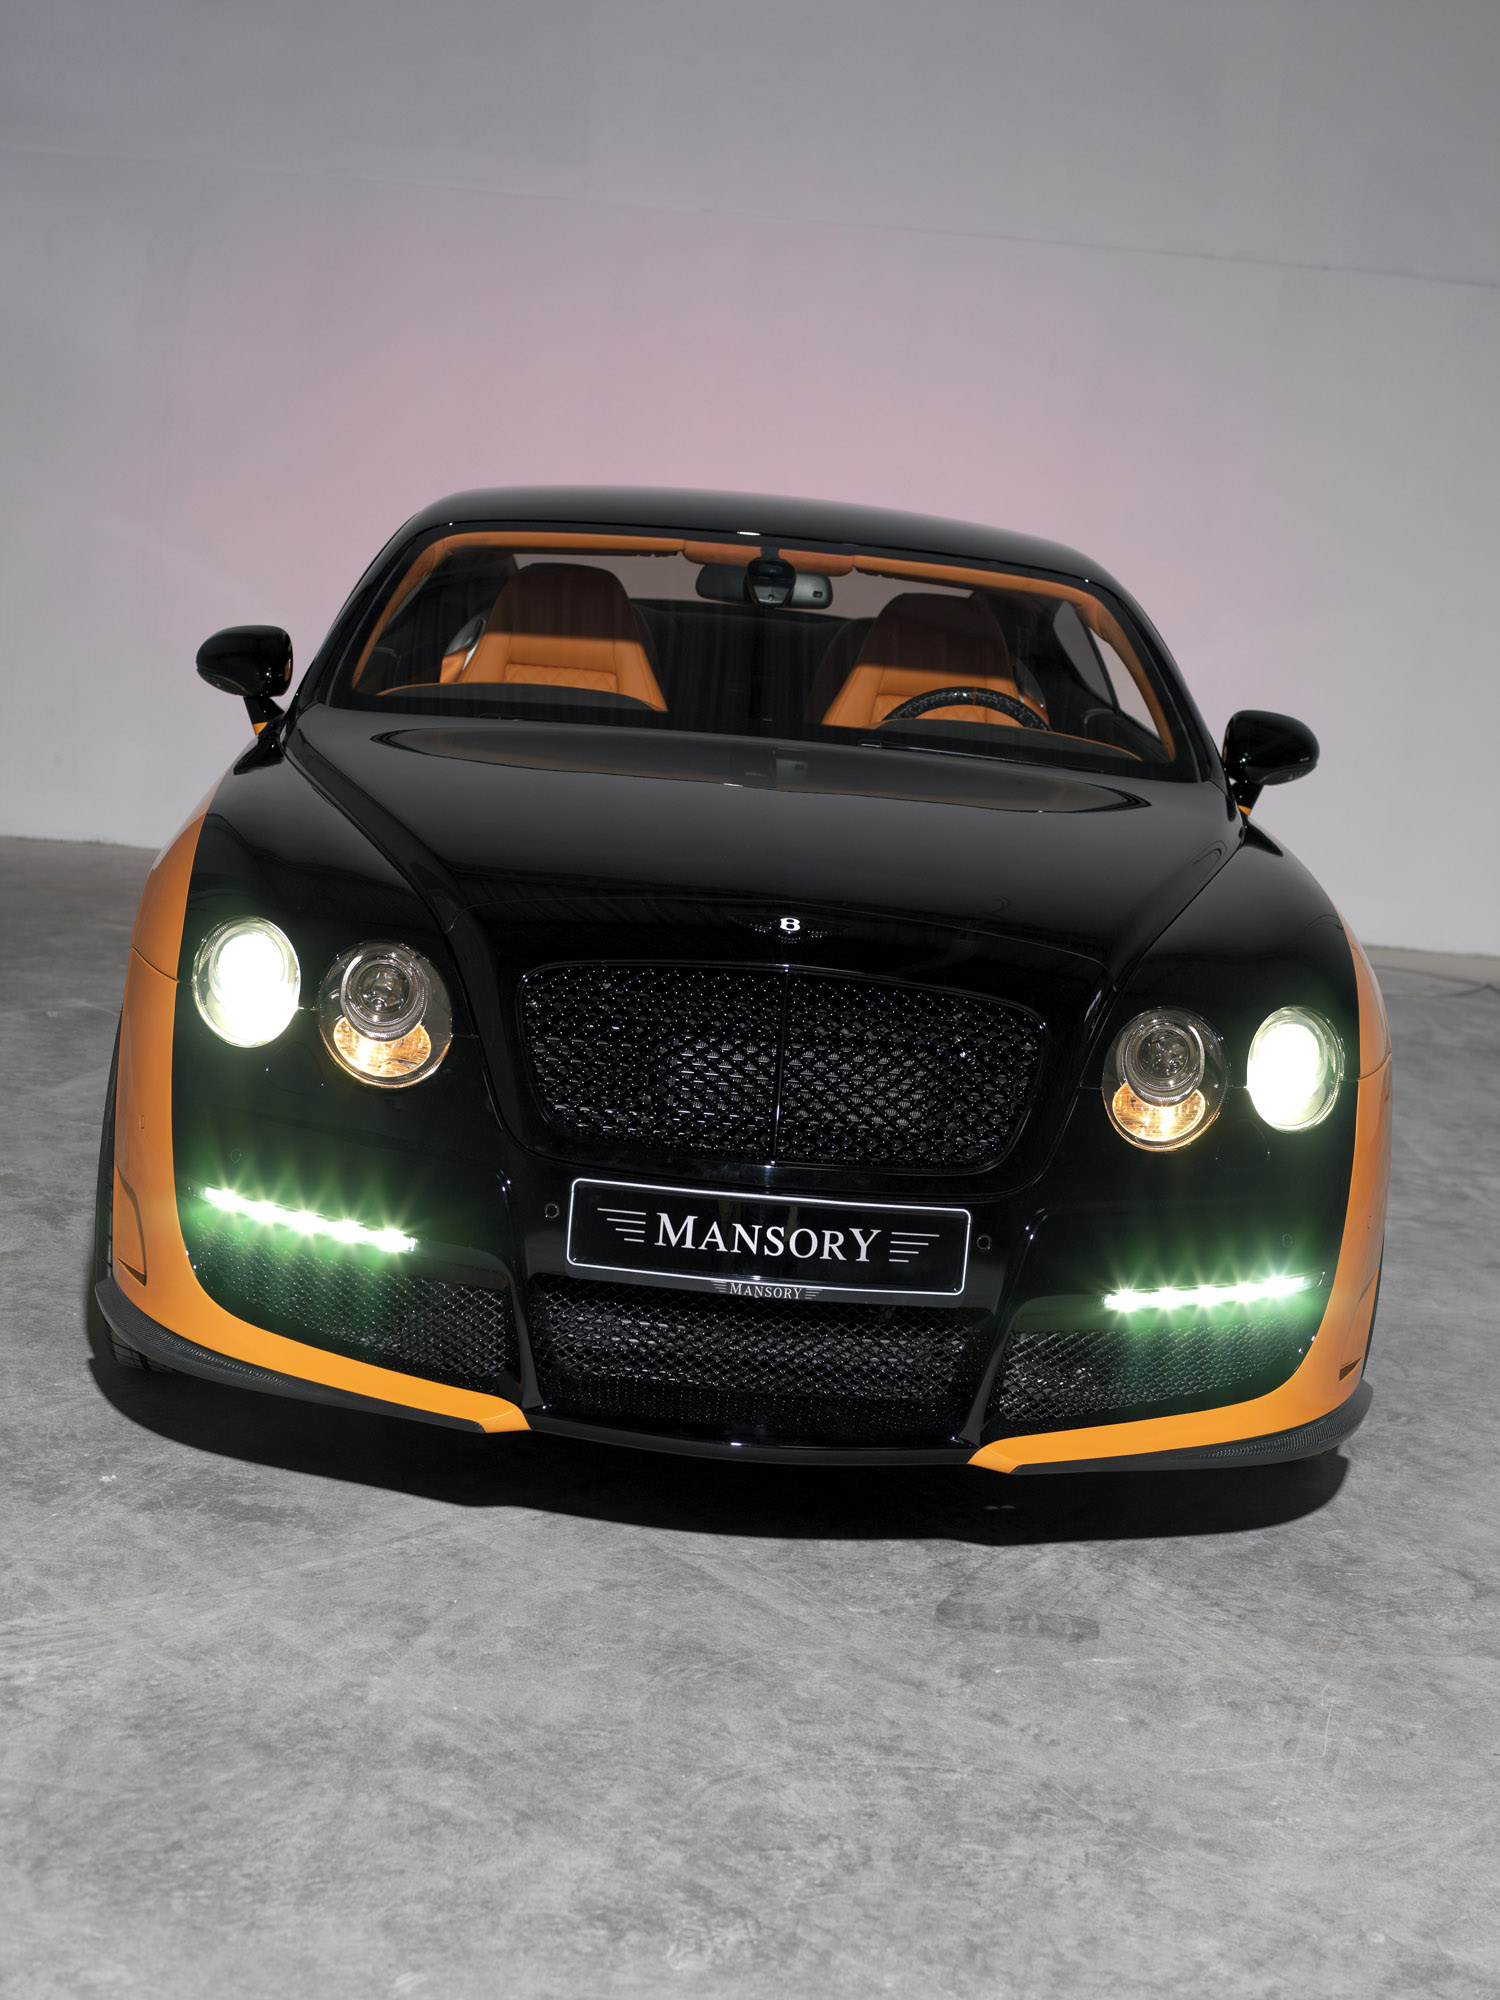 LE MANSORY Bentley Continental GT photo #1